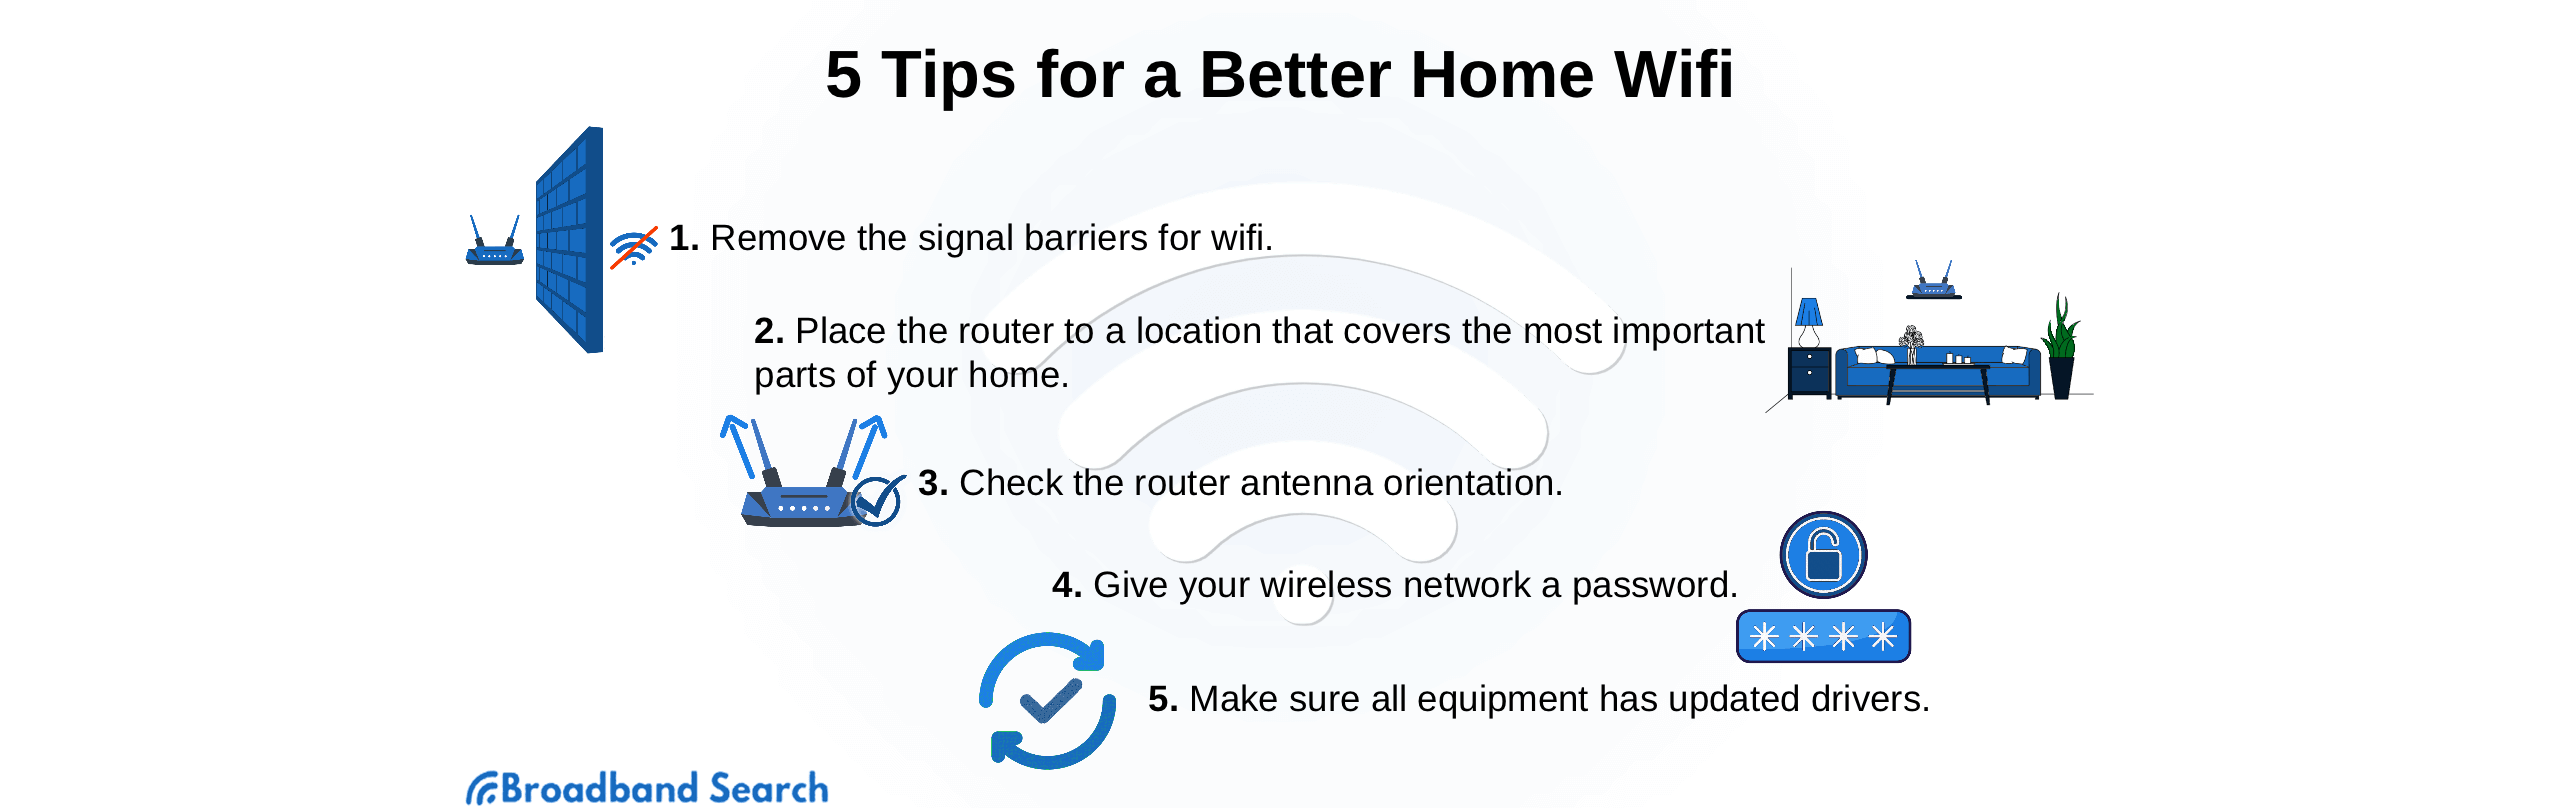 5 tips for a better home WiFi